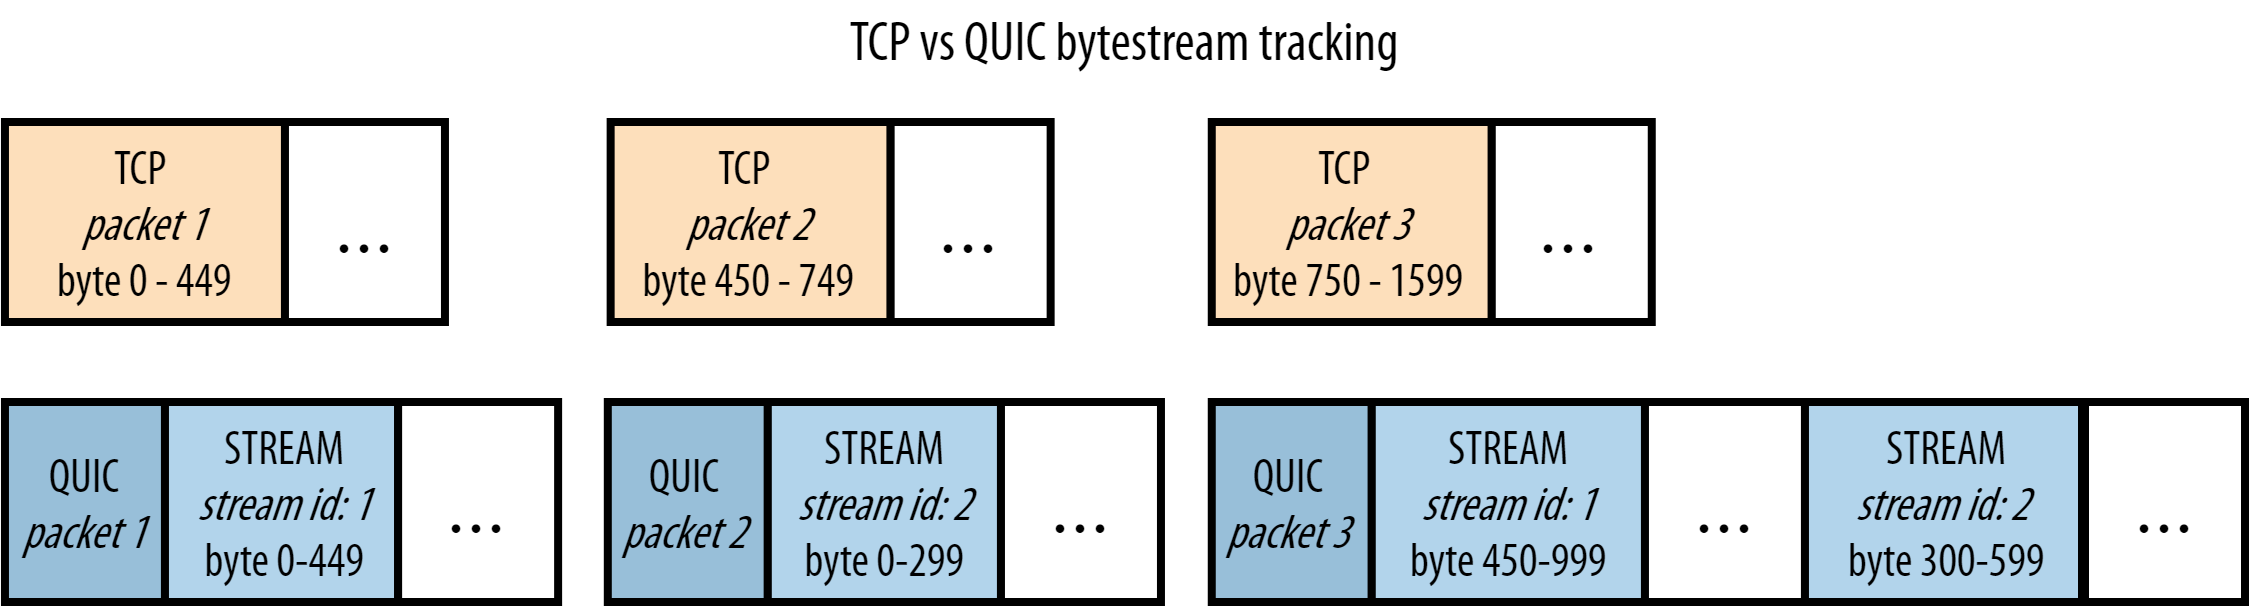 difference in perspective between TCP and QUIC